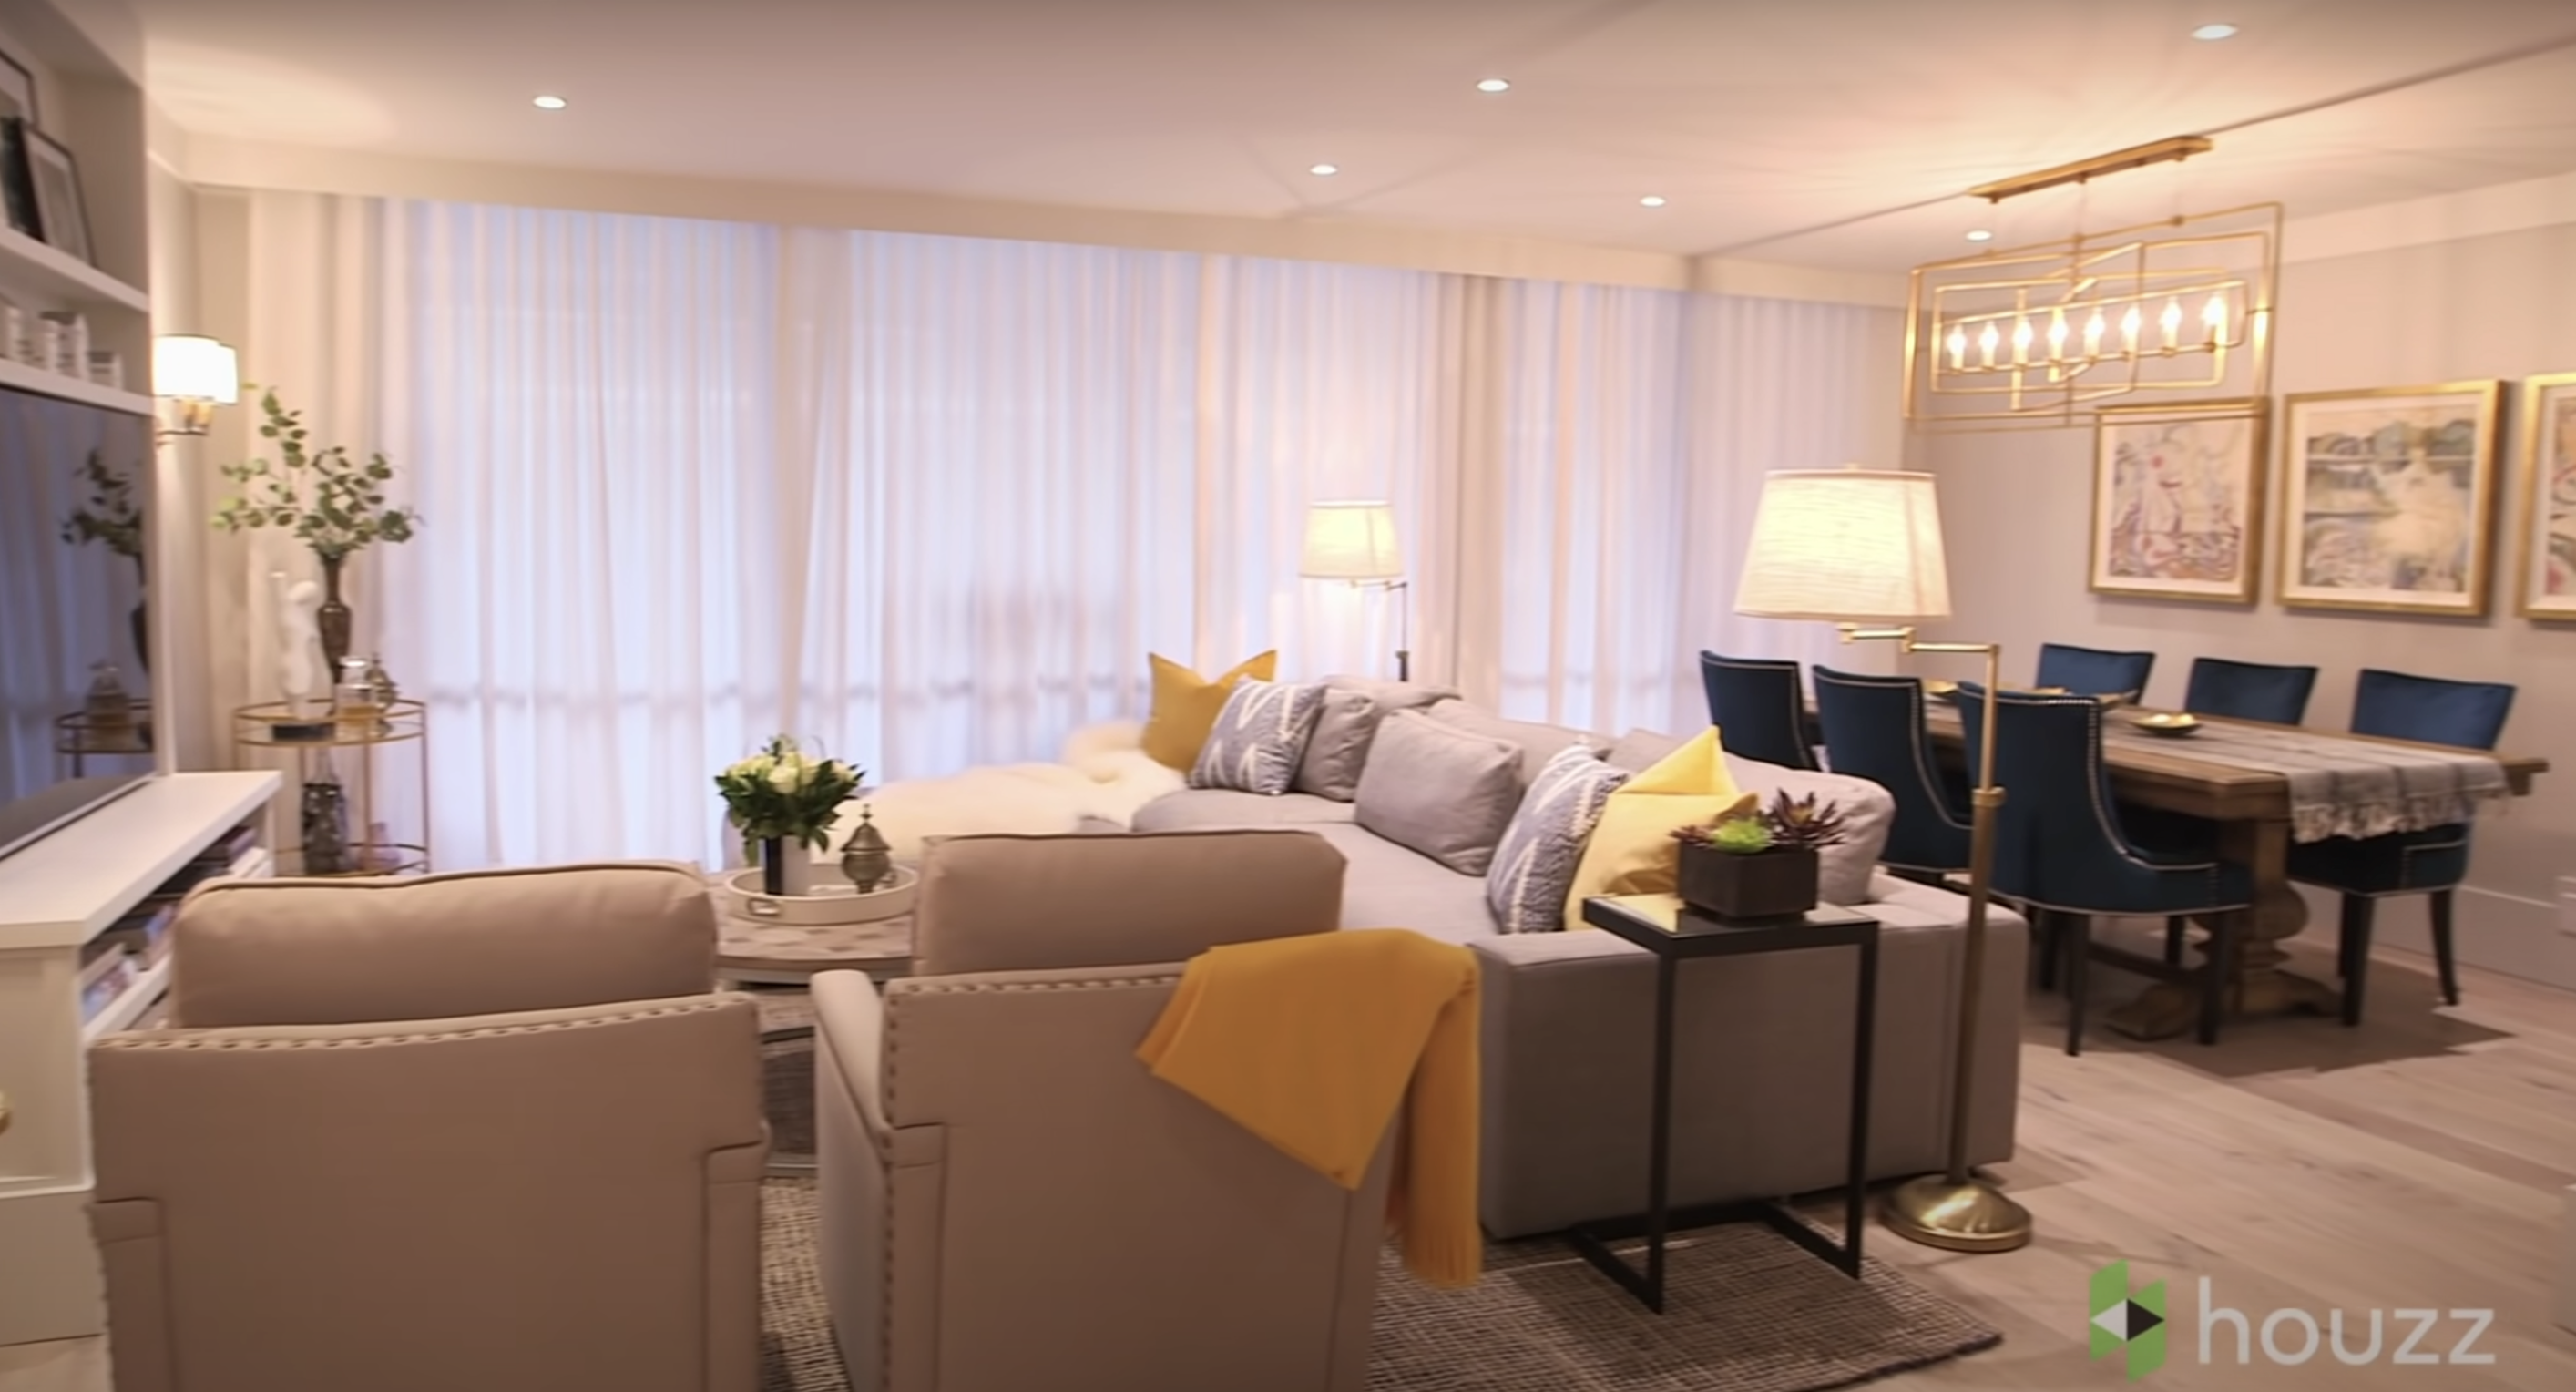 The new and spruced-up living room of Mila Kunis' family condo | Source: Youtube.com/HouzzTV